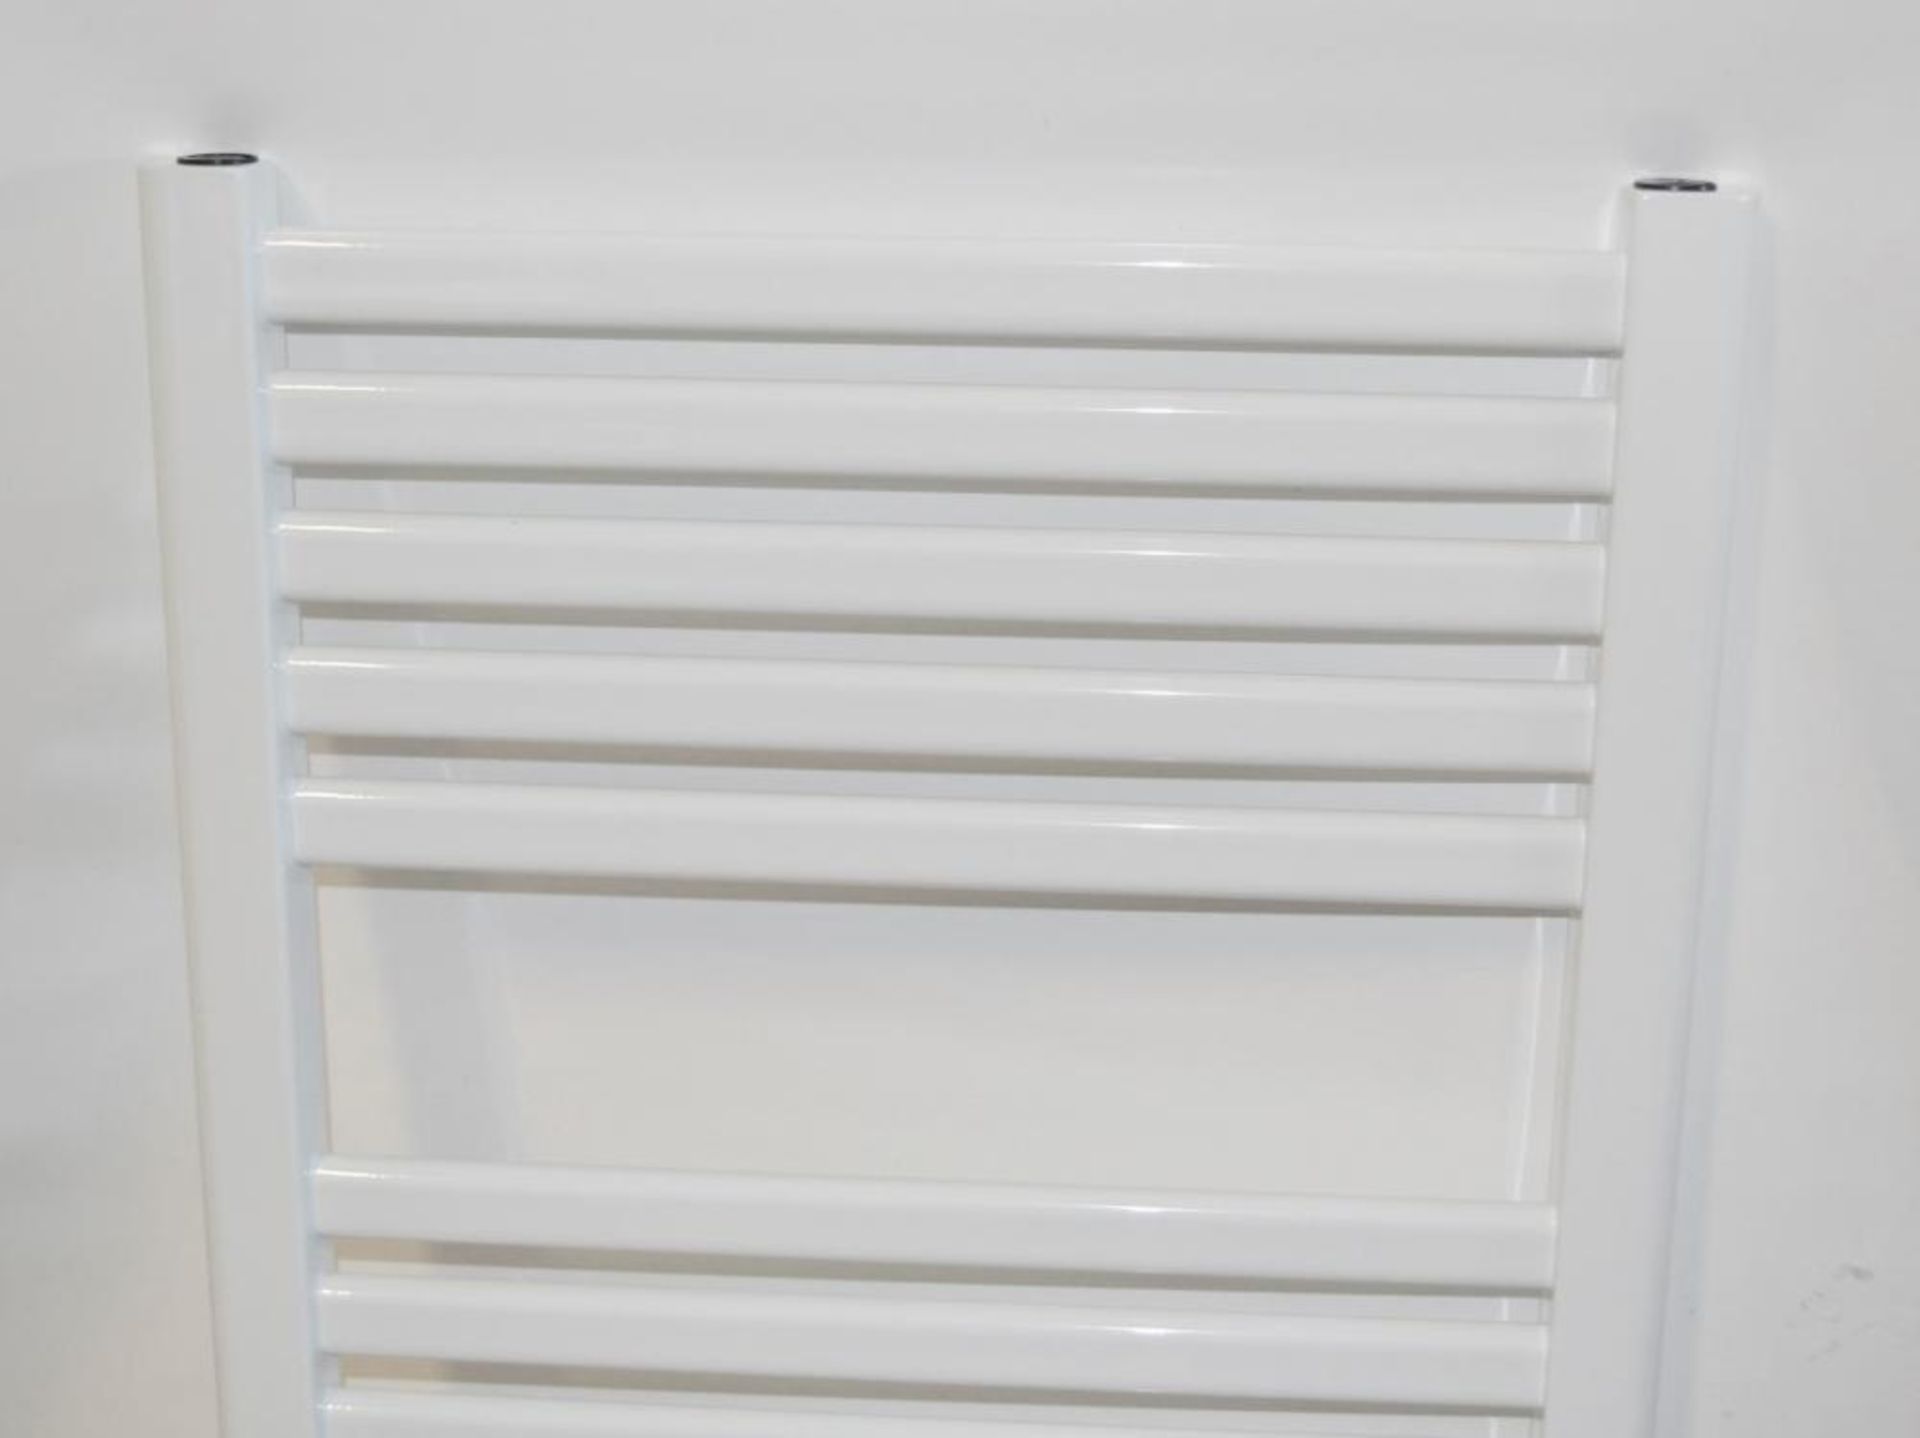 1 x OVAL Heated Towel Rail Radiator In White (TW27) - Unused Boxed Stock - Size: 1200 x 500mm - CL19 - Image 6 of 10